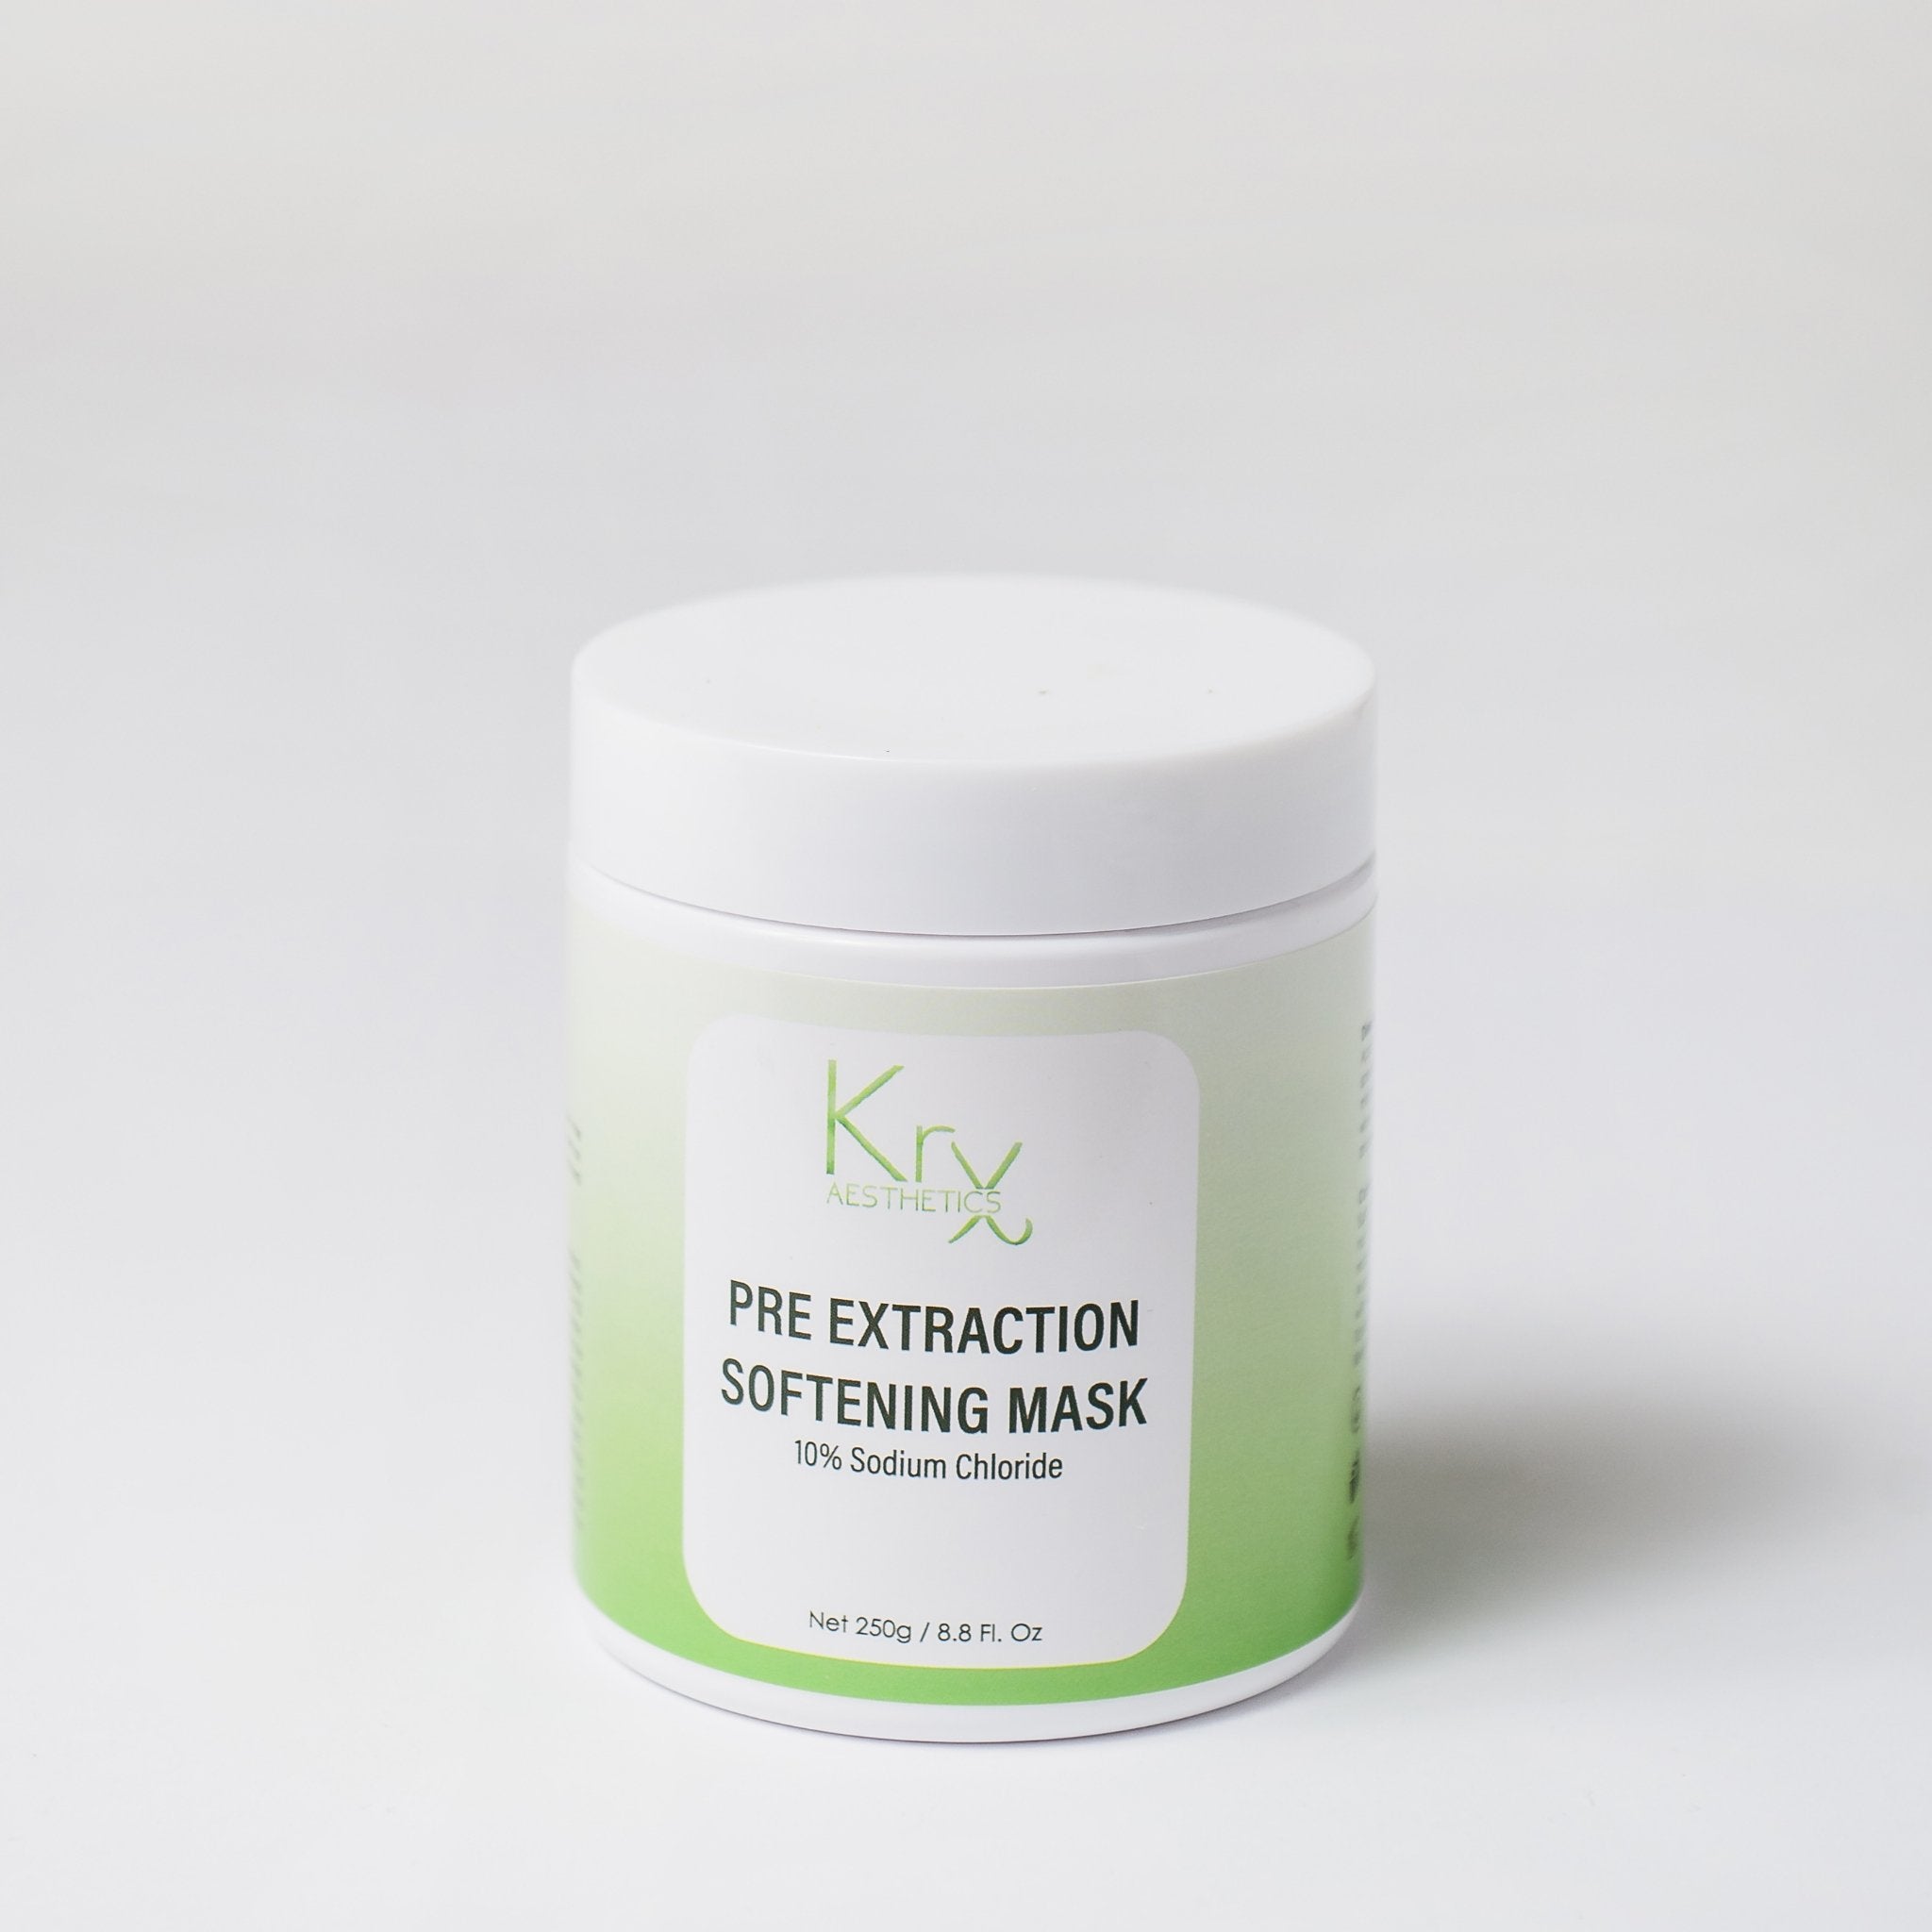 Krx Pre Extraction Softening  Mask - by Kin Aesthetics 